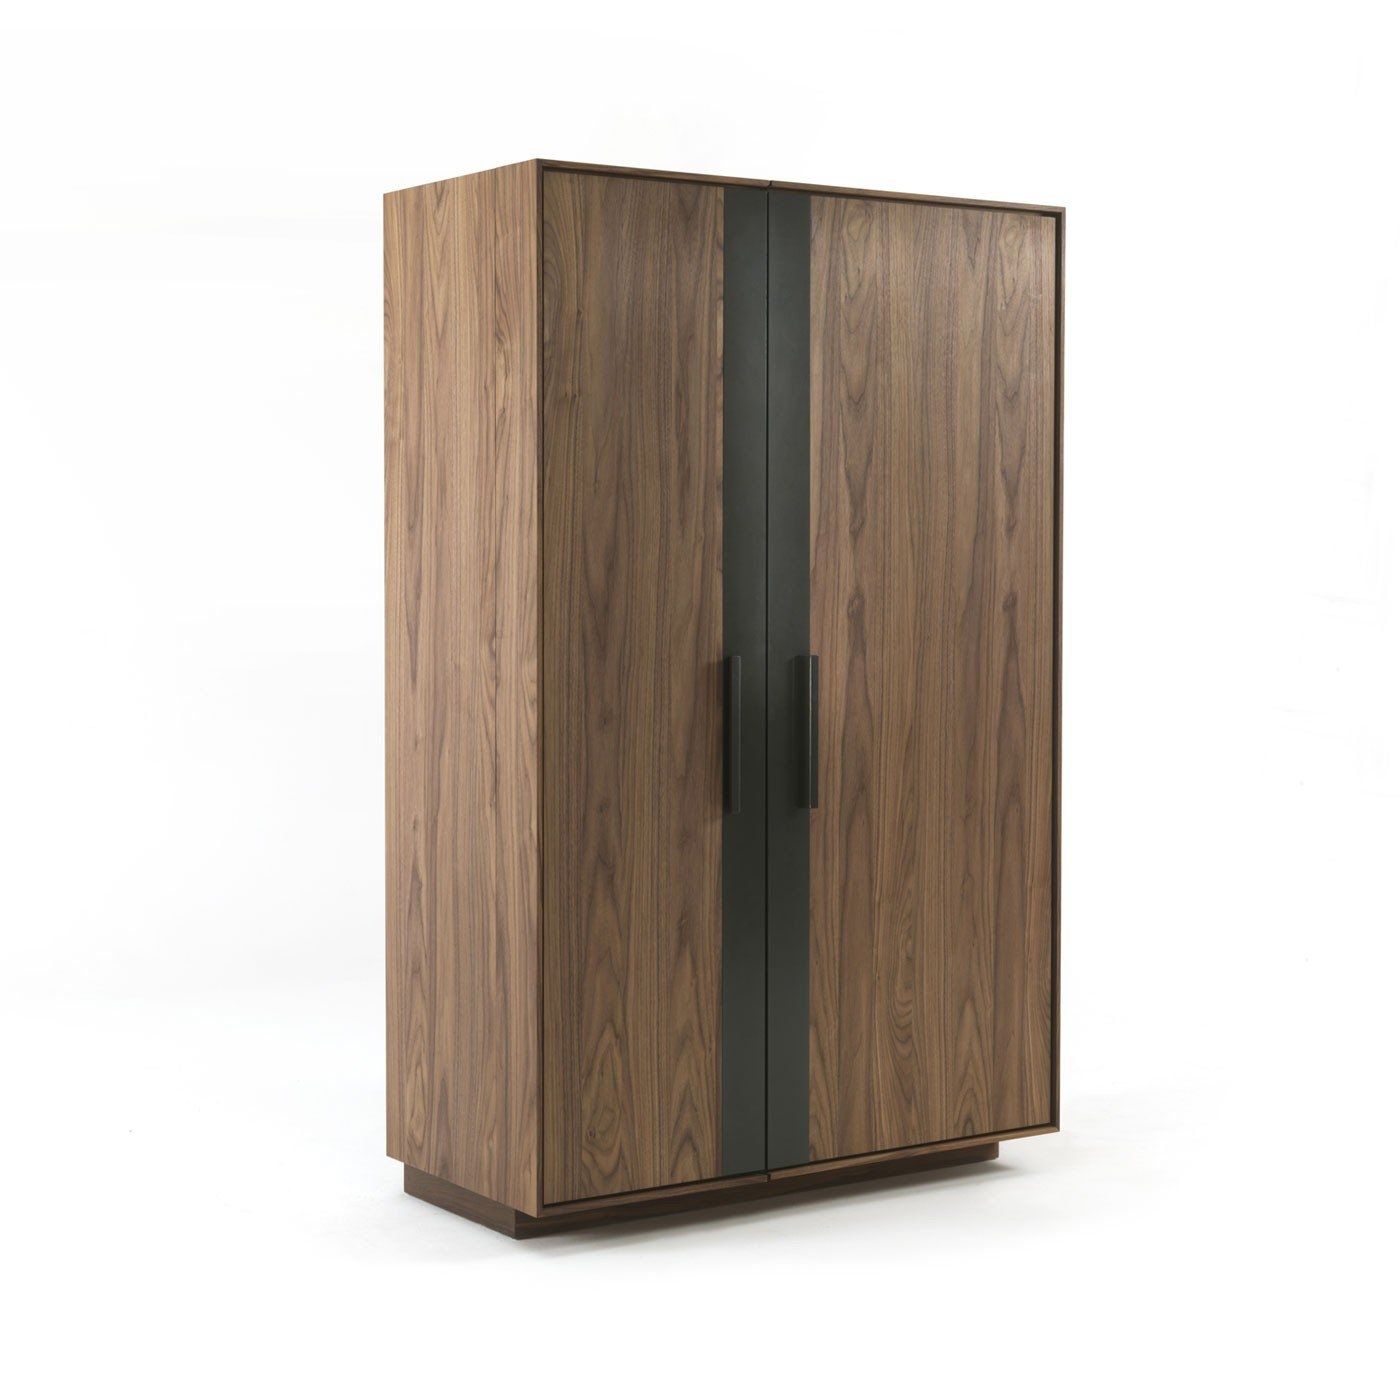 Designer Sideboards | Modern & Contemporary Sideboards | Heal's Inside Walnut Finish Contempo Sideboards (View 20 of 30)